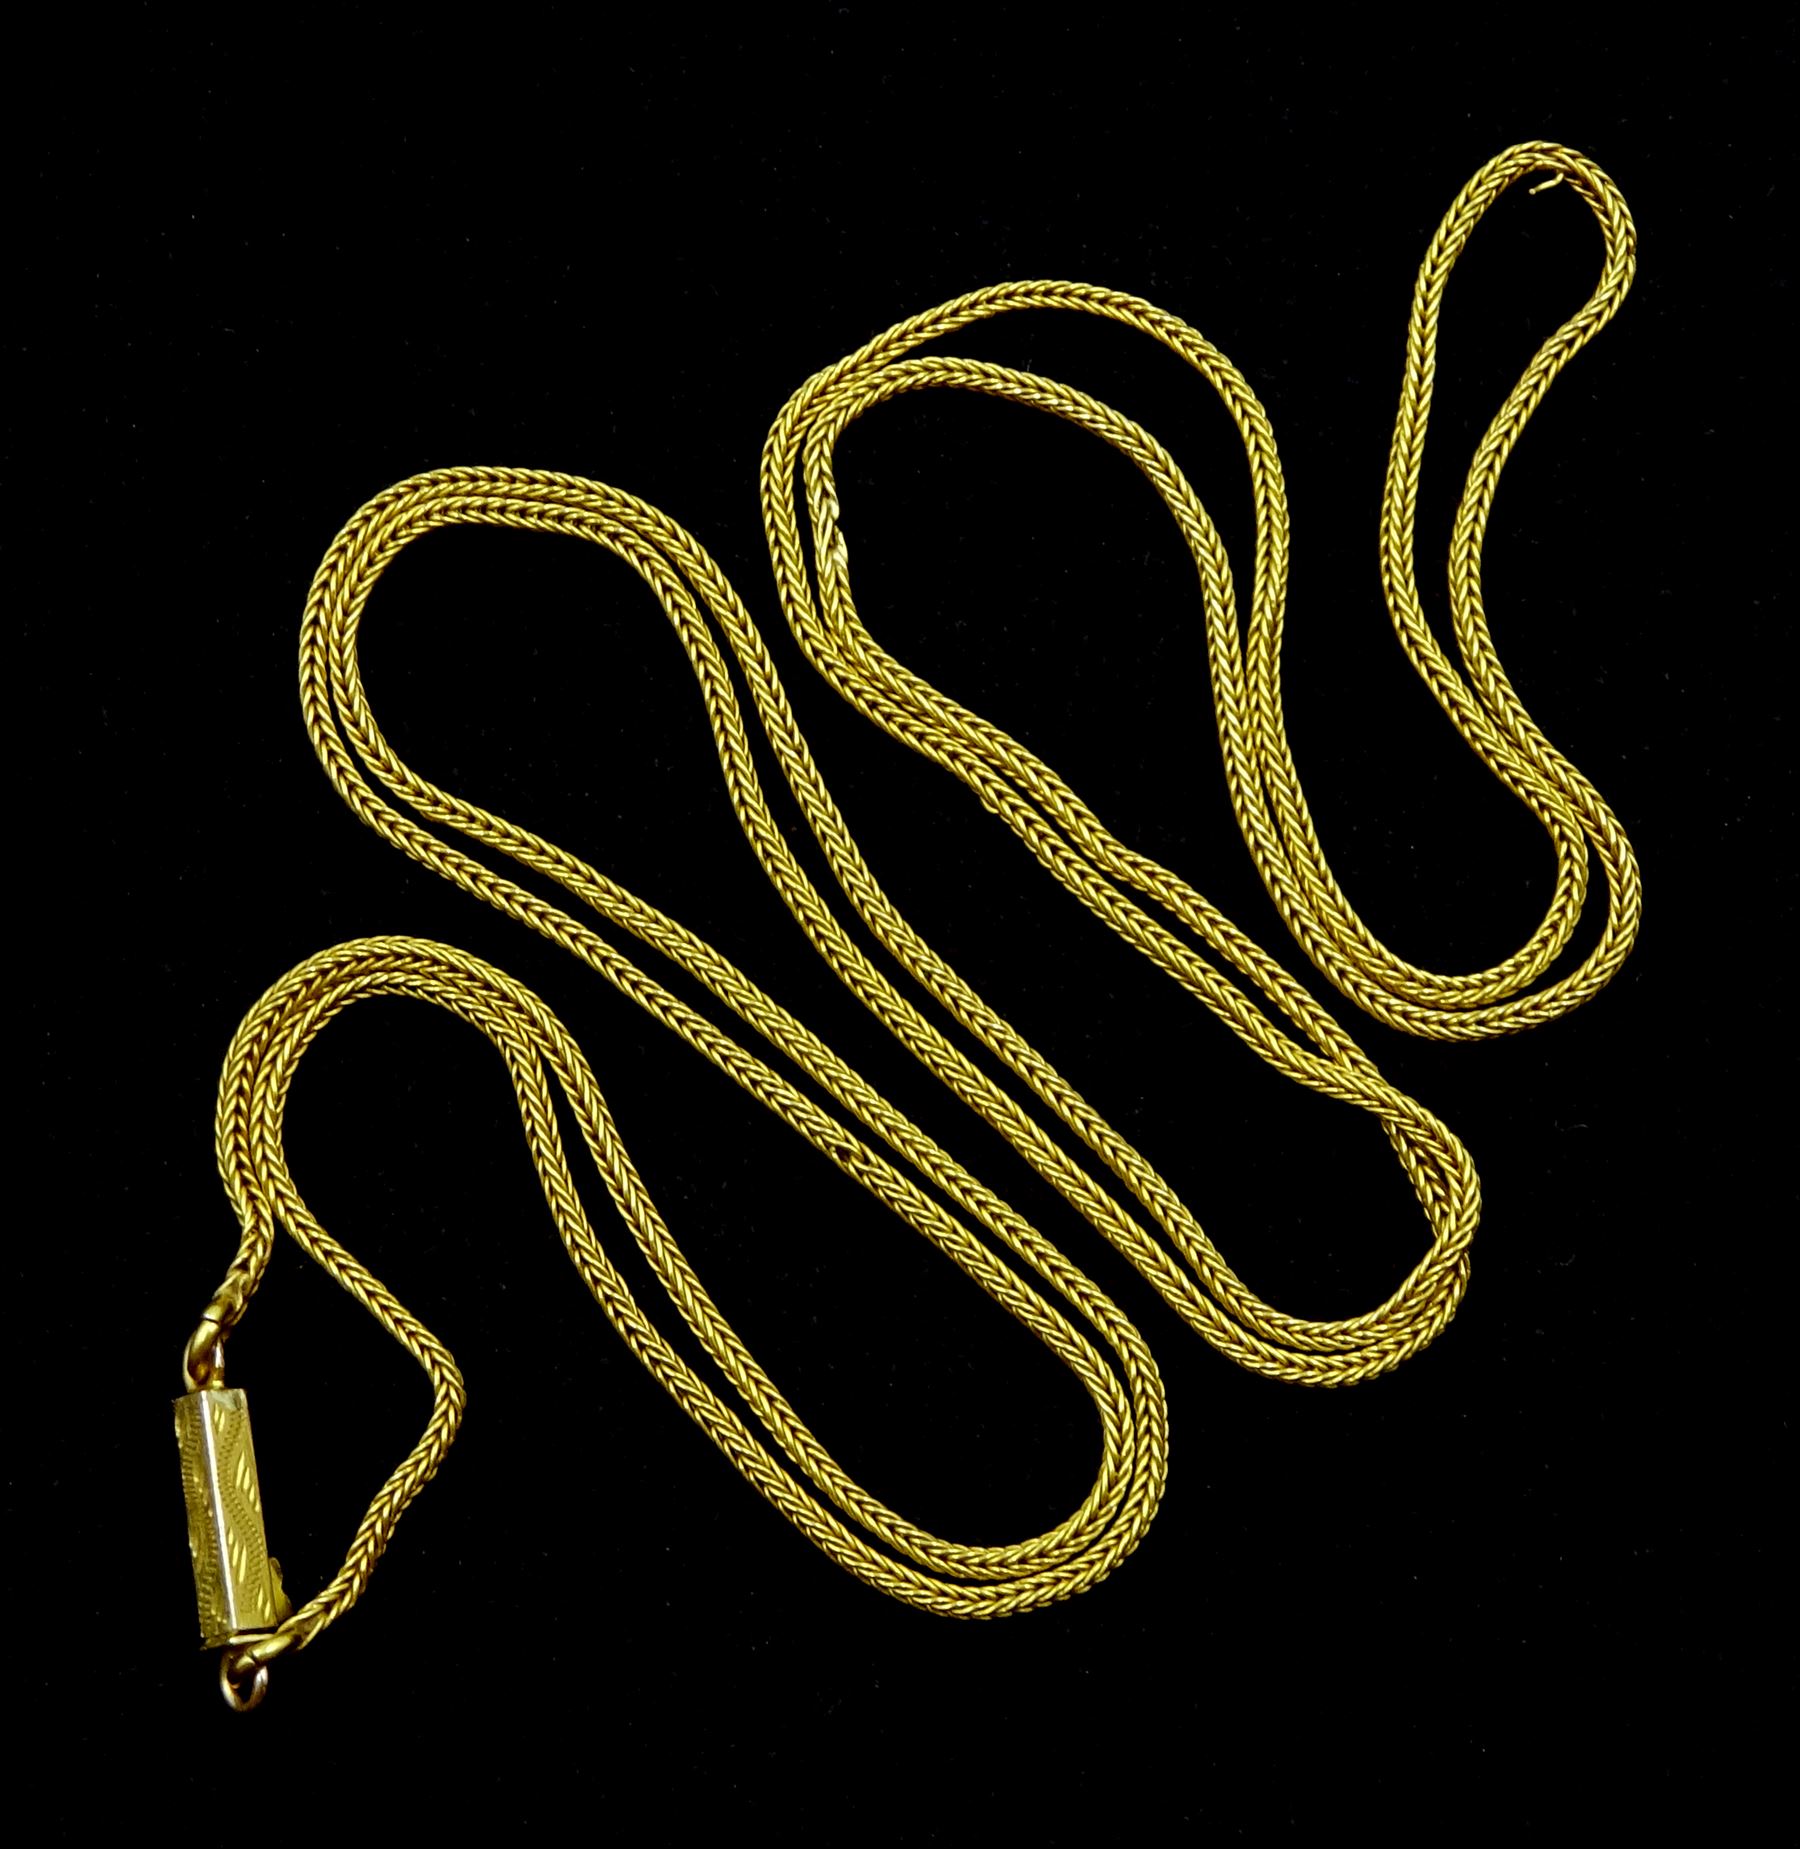 Gold foxtail link necklace tested to 20.5ct - Image 2 of 3